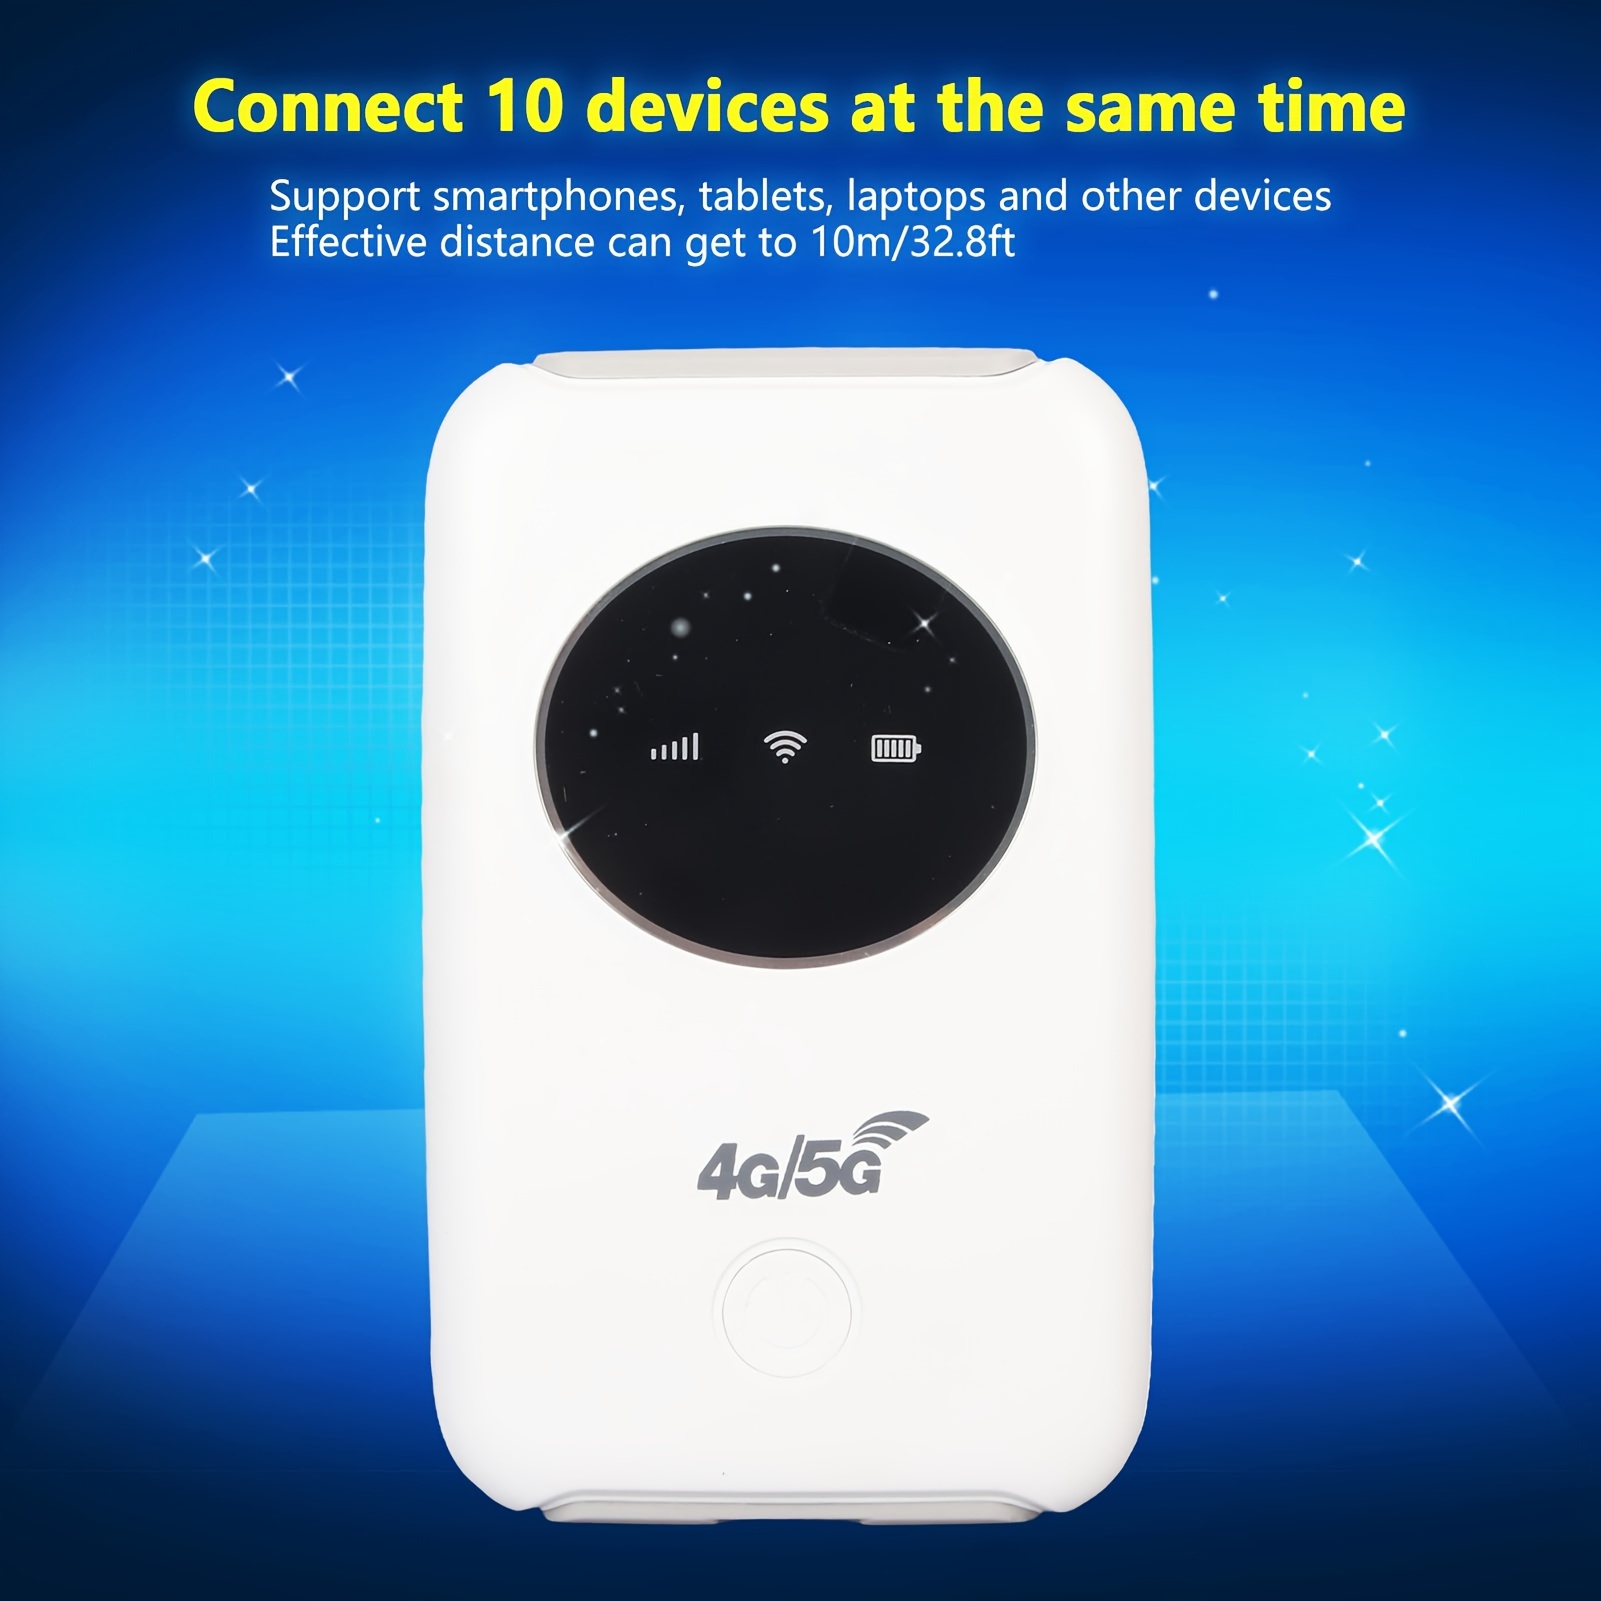 

Mobile , 4g Lte 5g Wifi Hotspot 300mbps Modem Up To 10 Devices, Sim Slot, 3200mah Battery, Wireless Portable Wifi Device For Travel, Business Trip, Outdoor